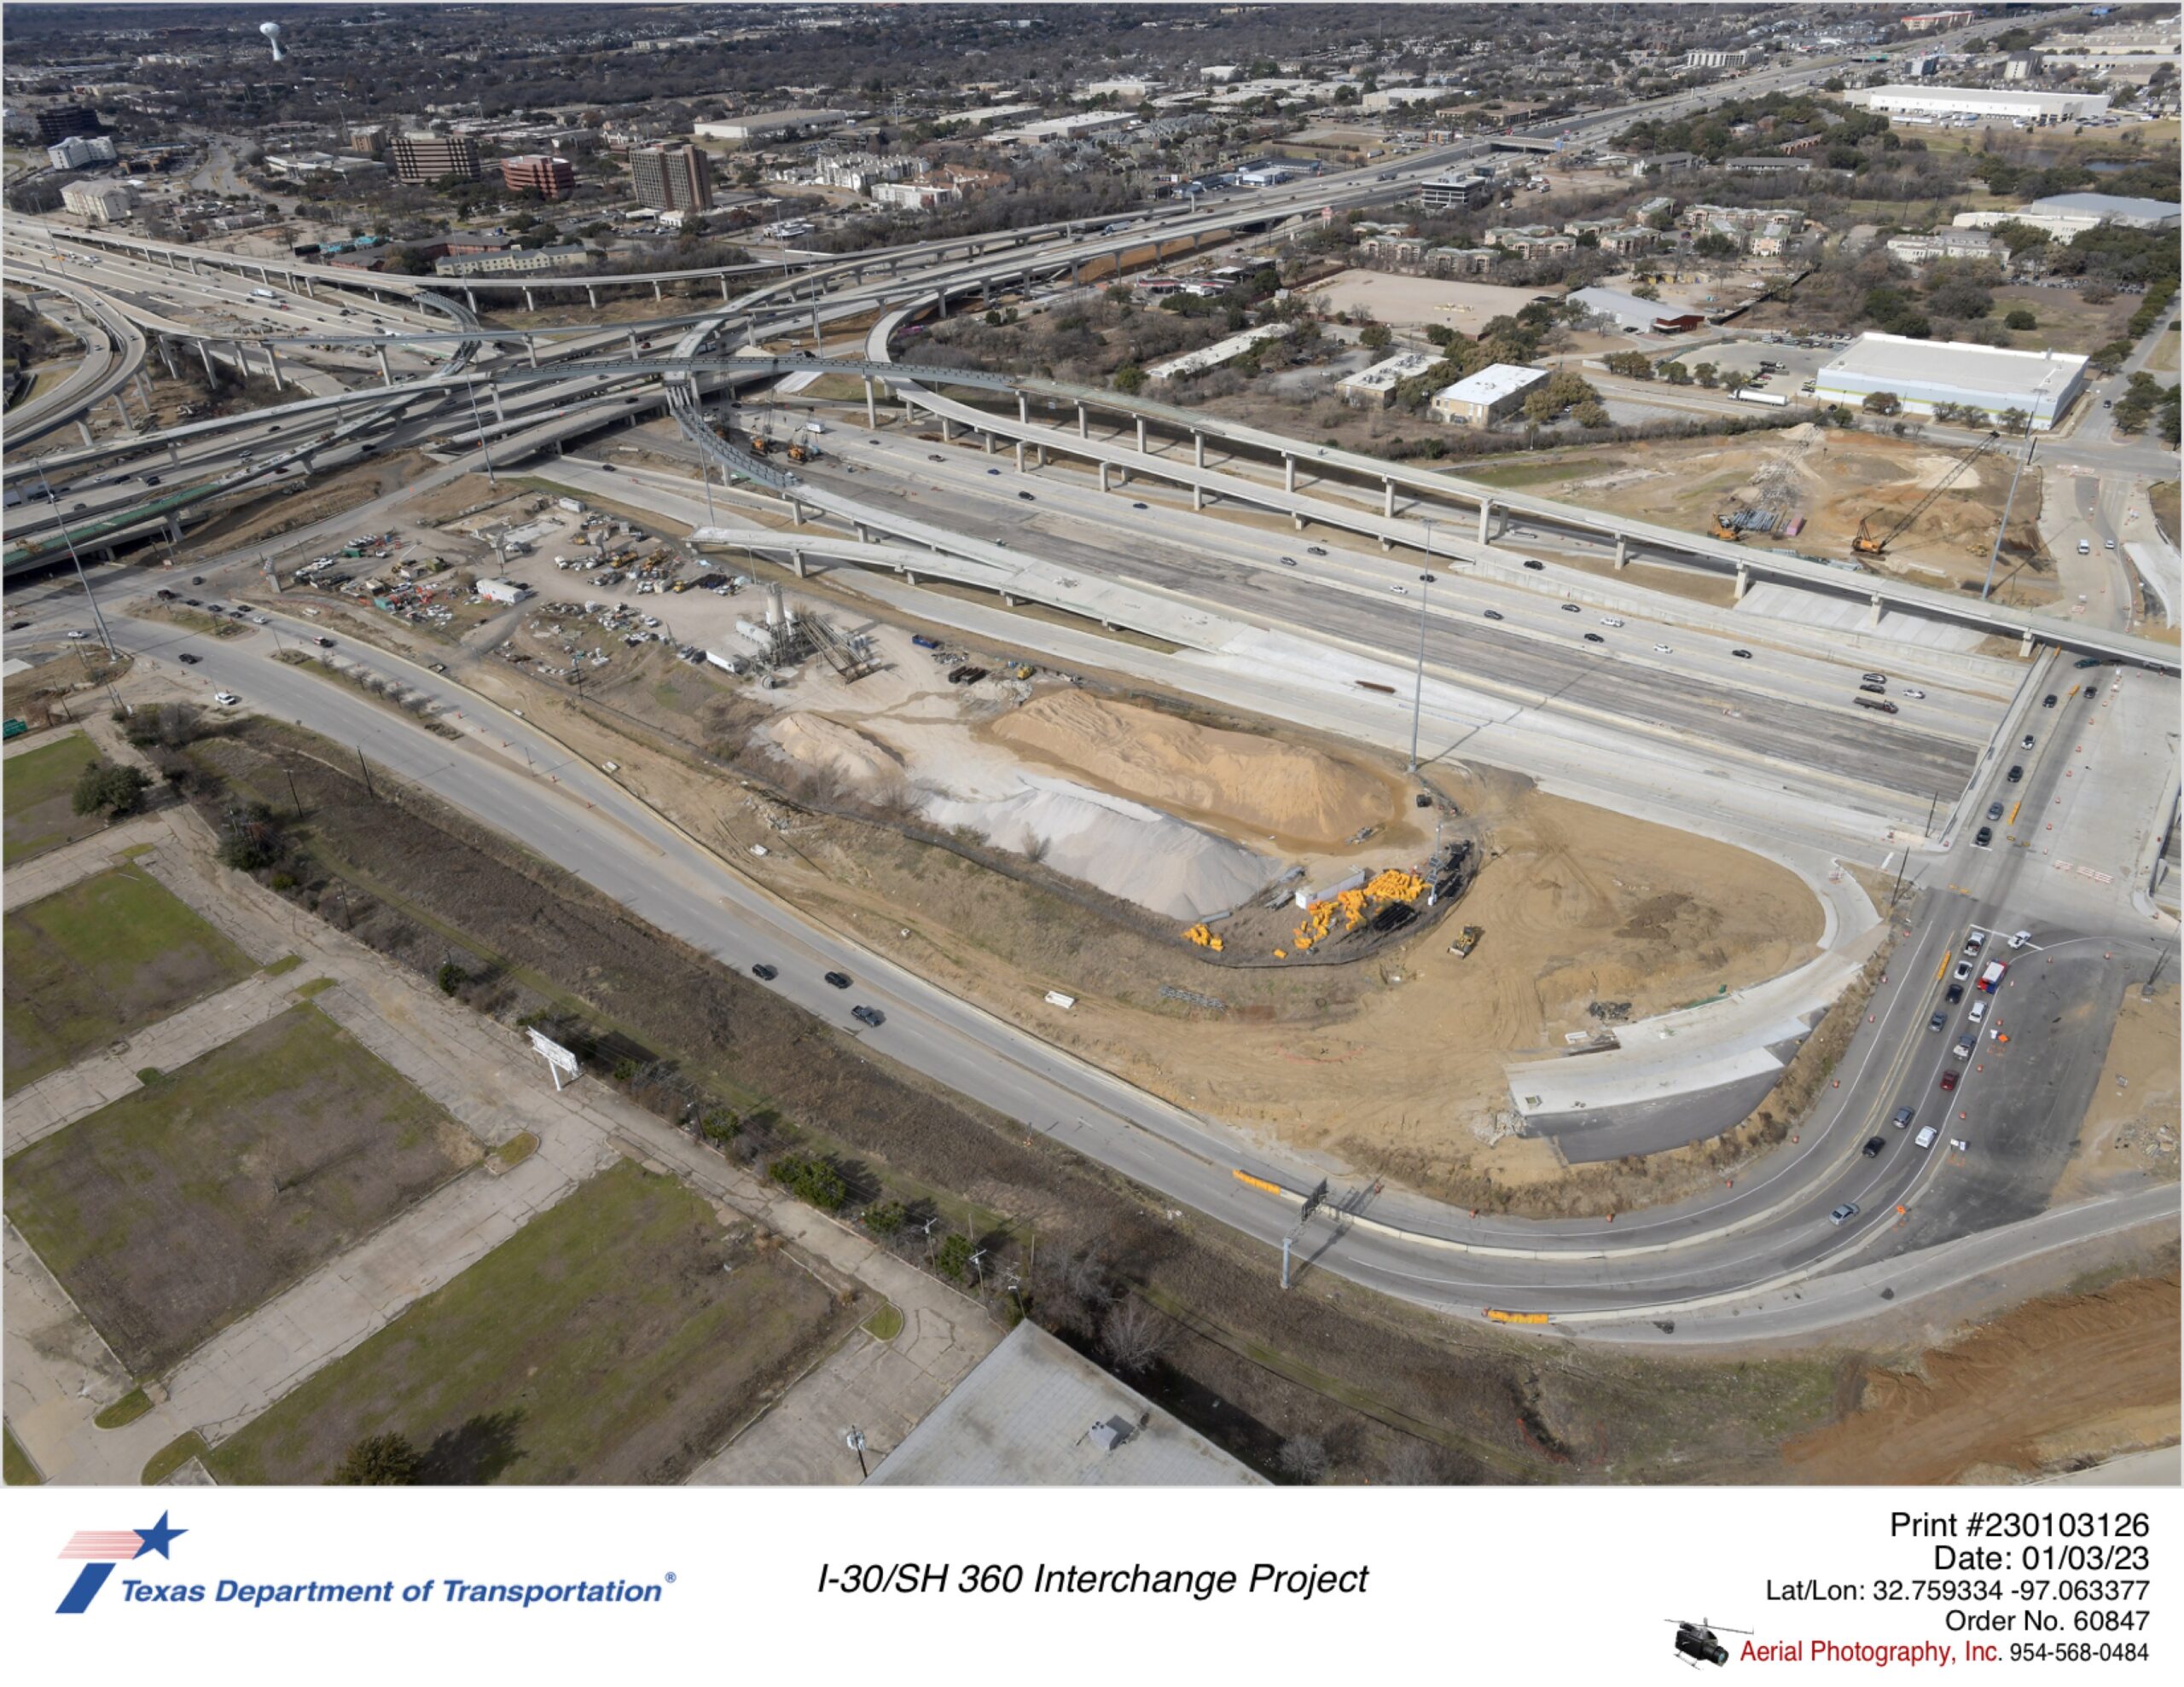 I-30 looking northwest over the Six Flags Drive and SH 360 interchanges.